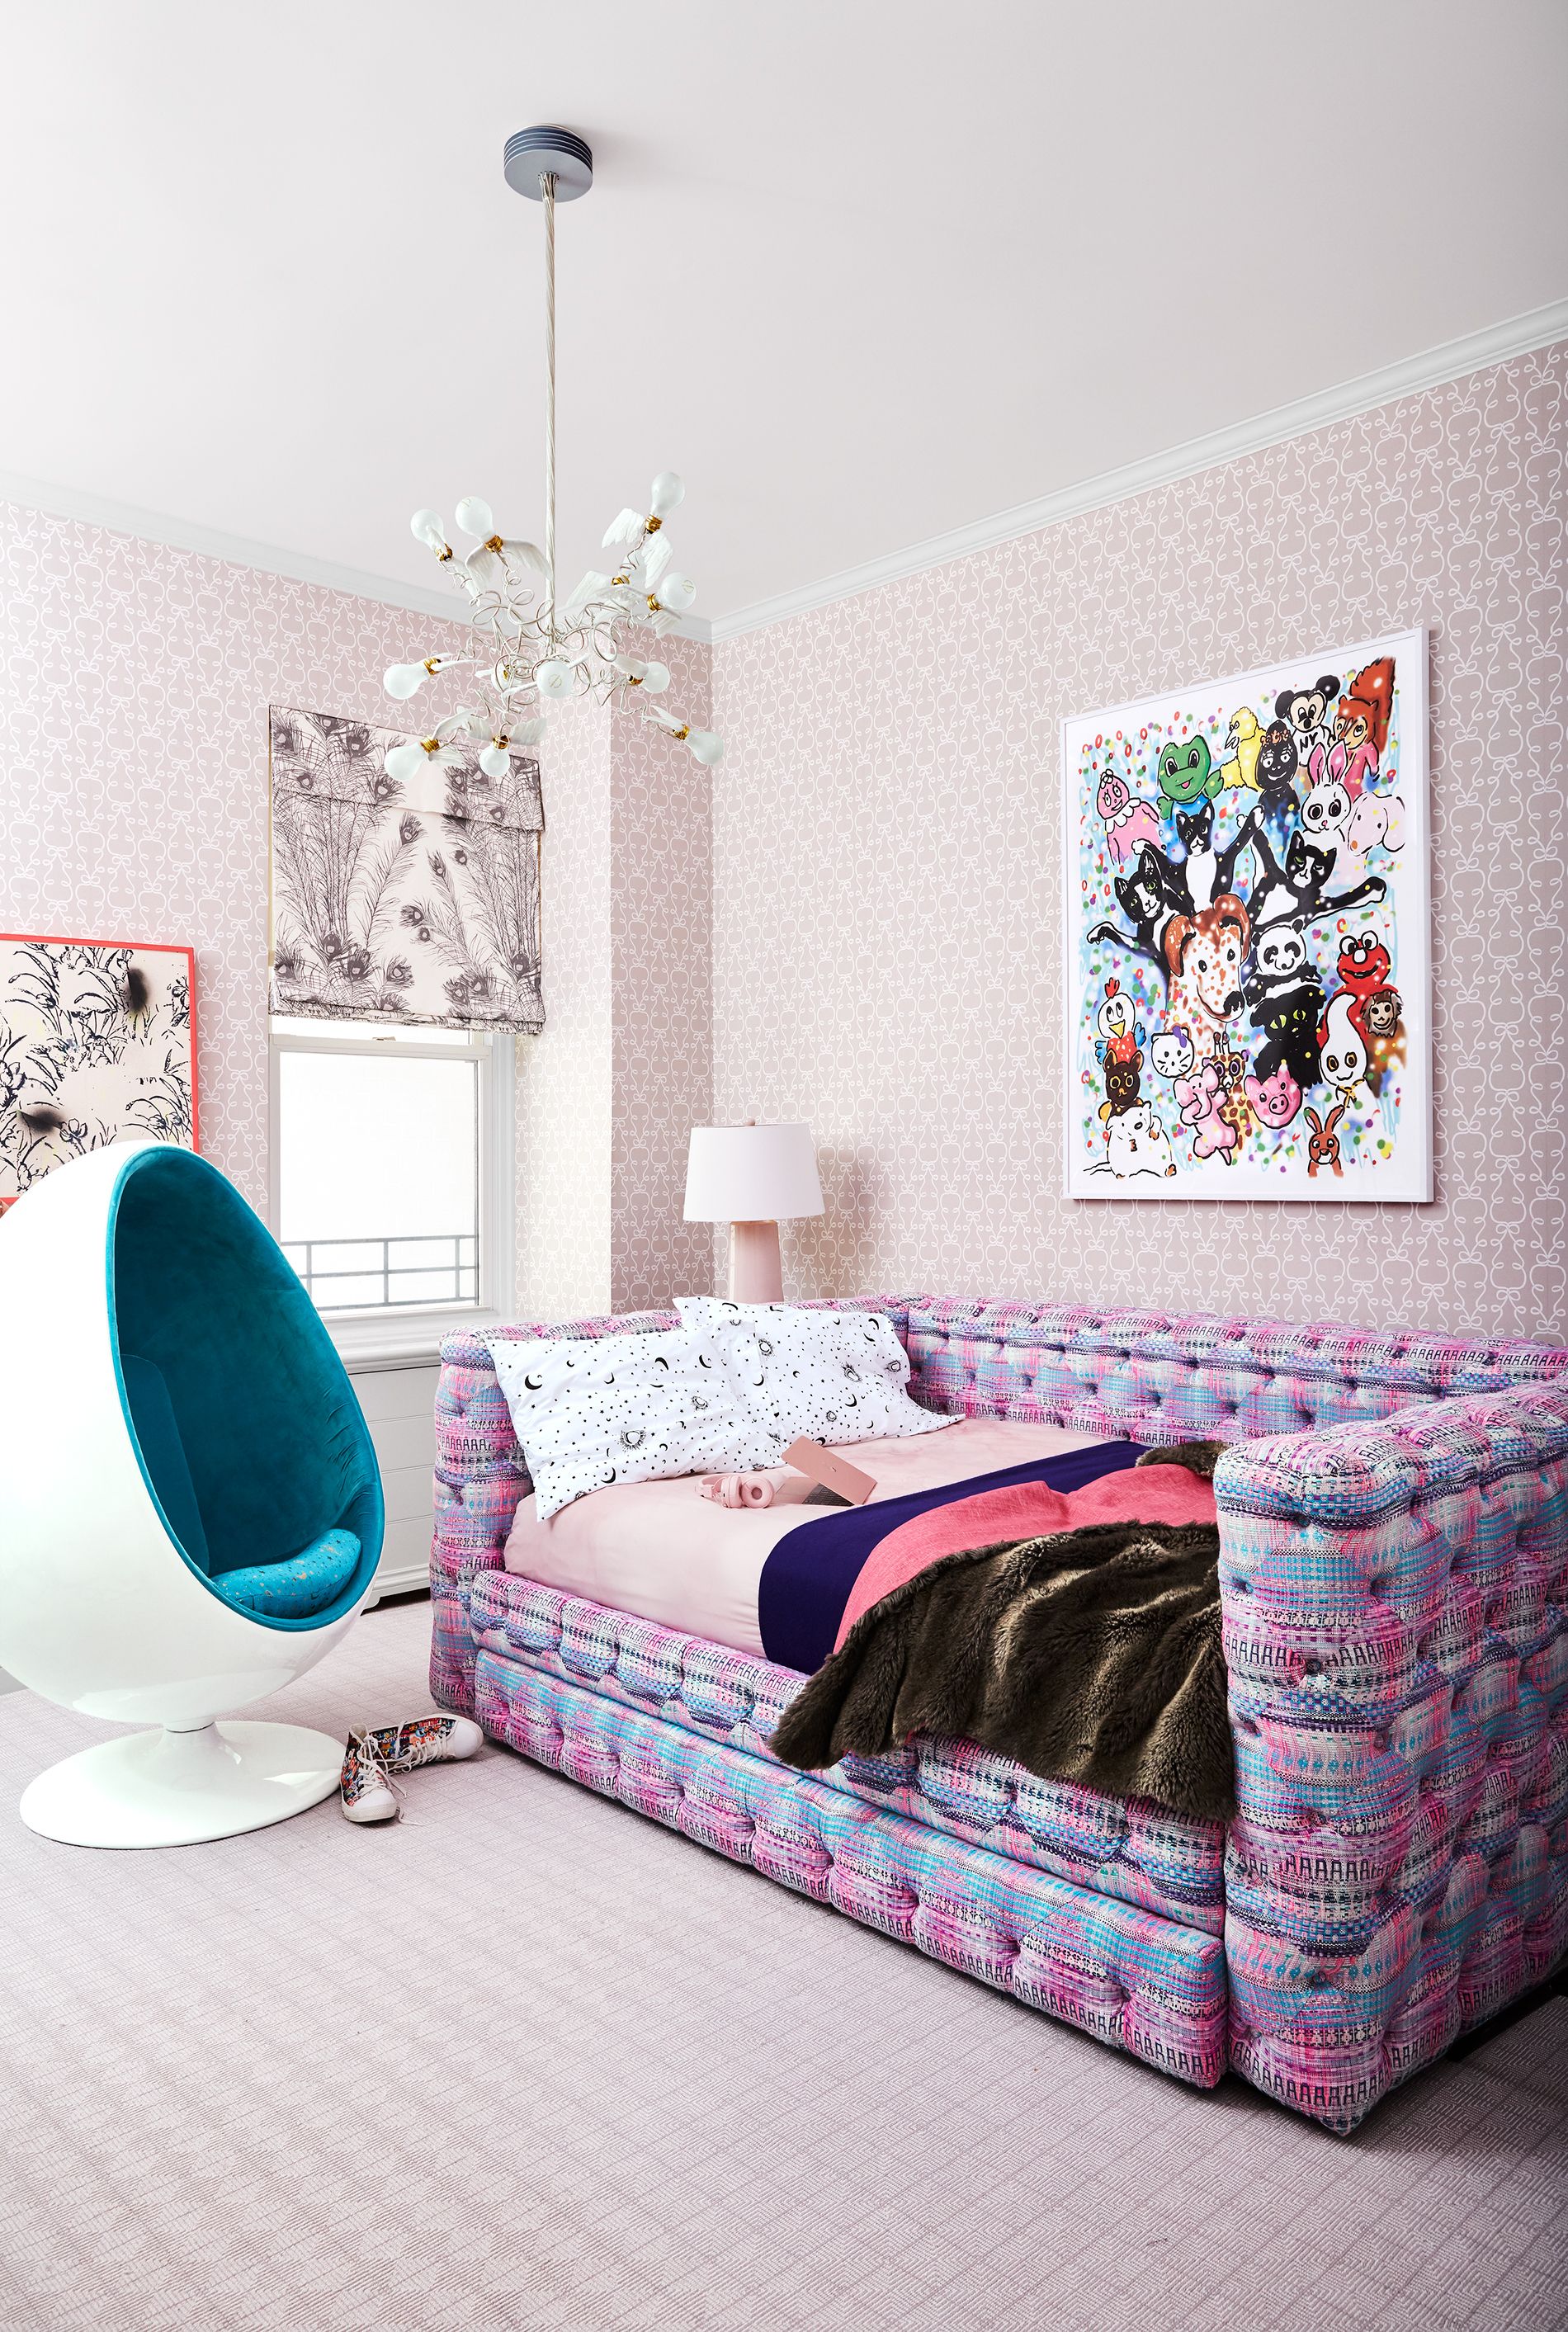 Rooms Ideas For Teen Rooms